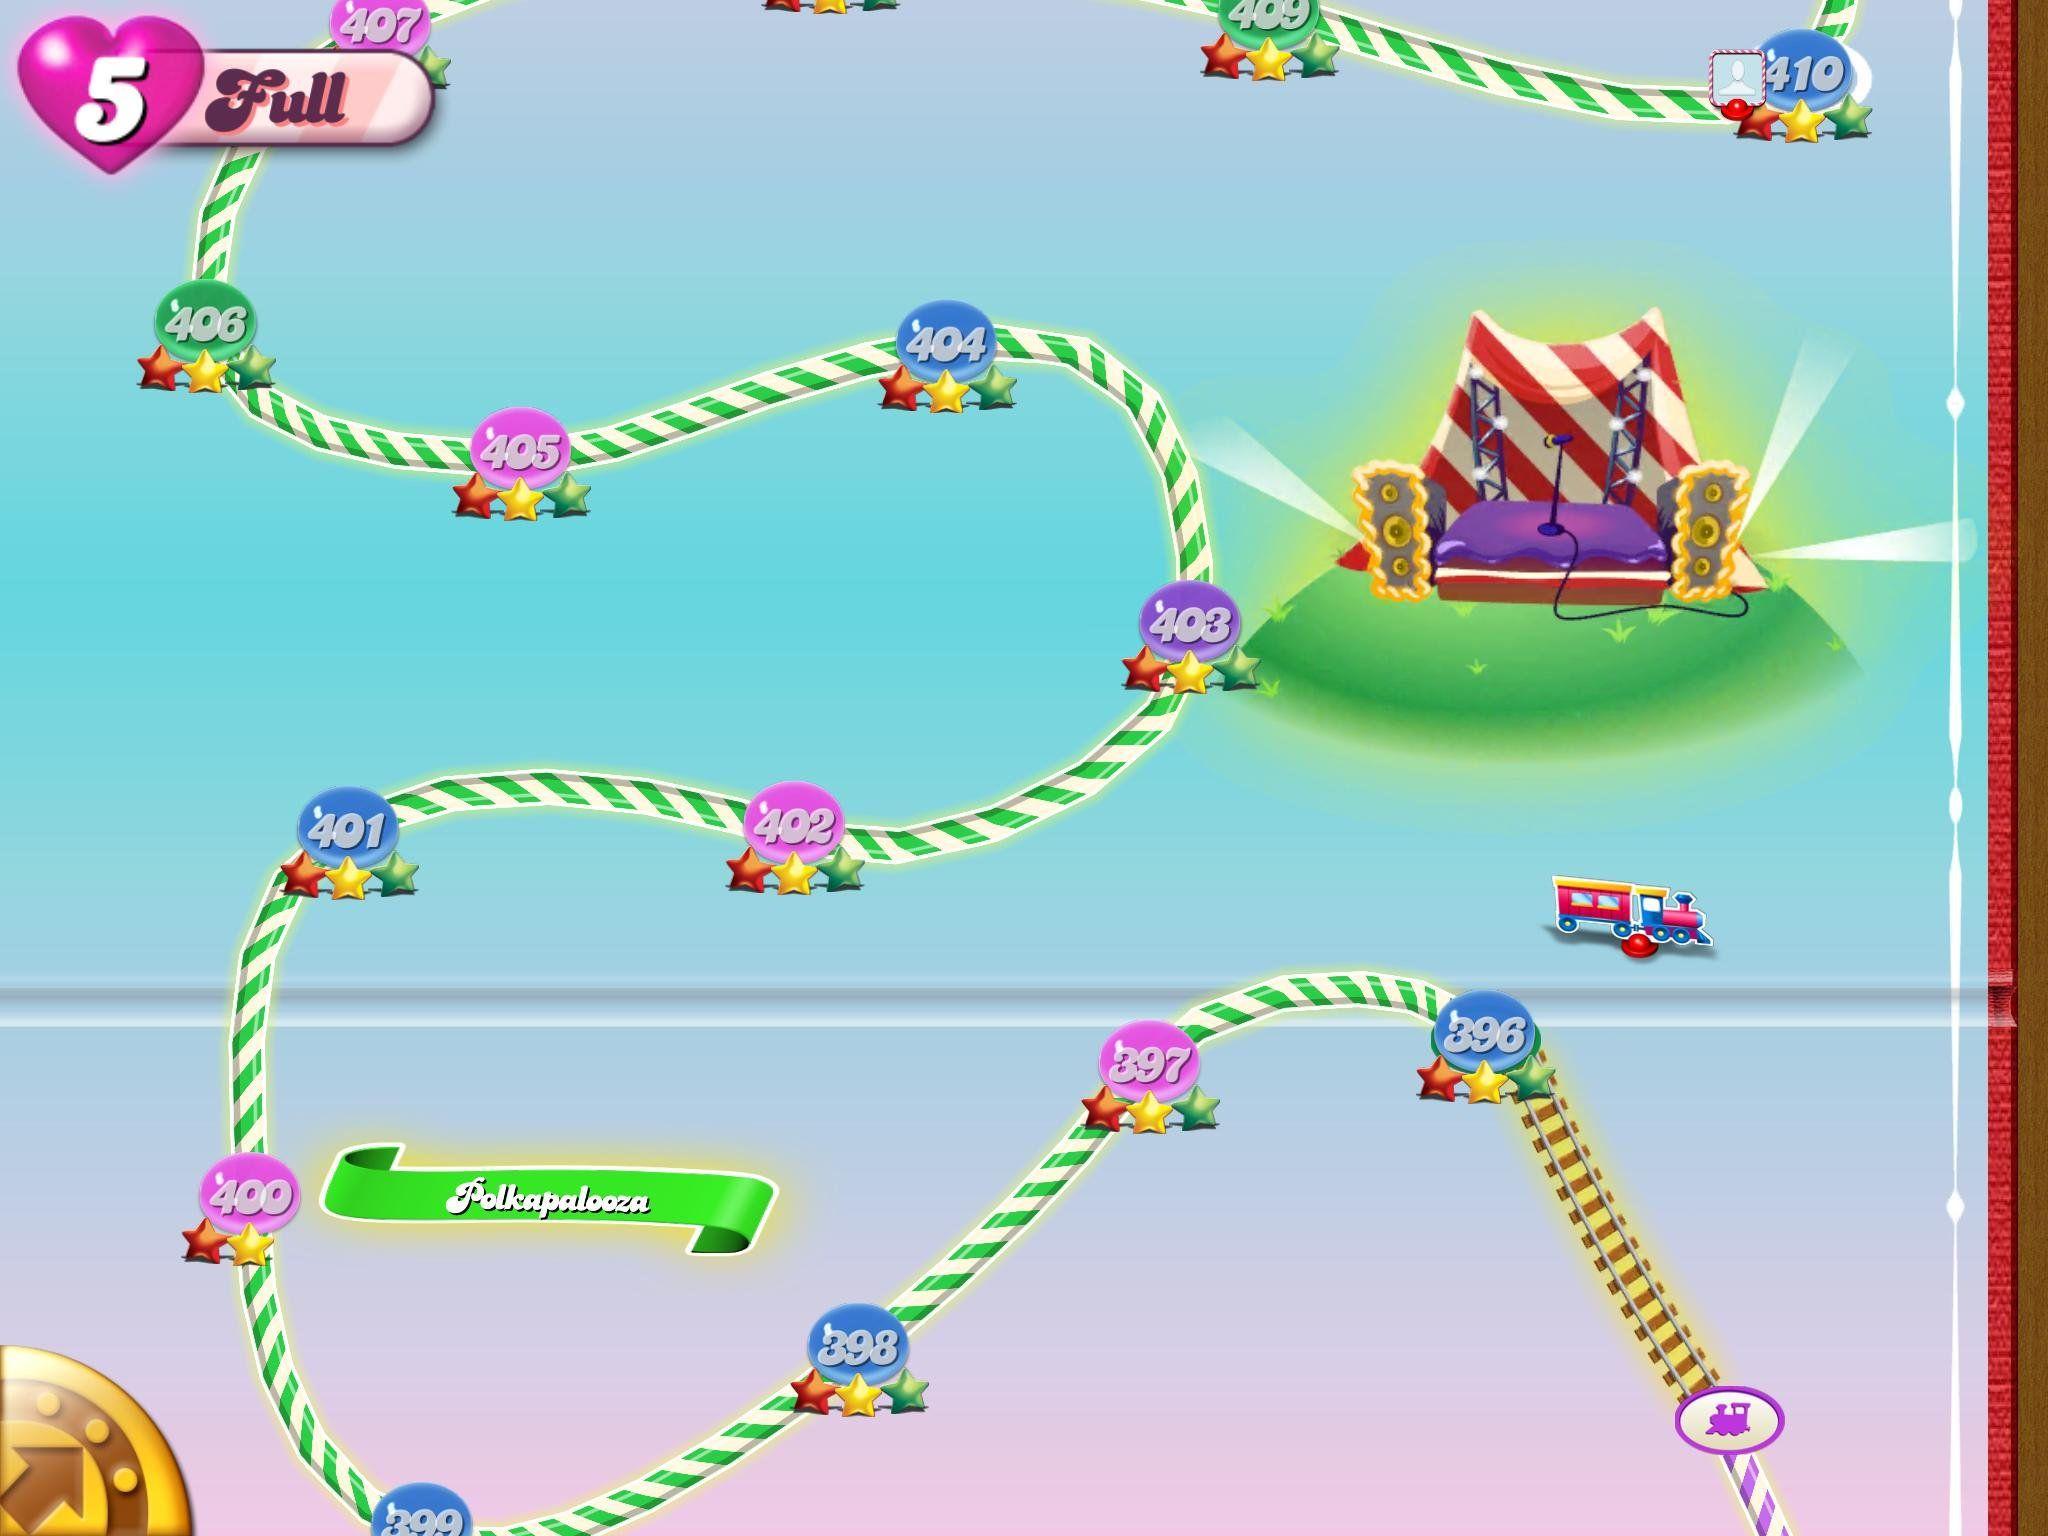 CANDY CRUSH SAGA Match Online Puzzle Family Wallpaperx1536